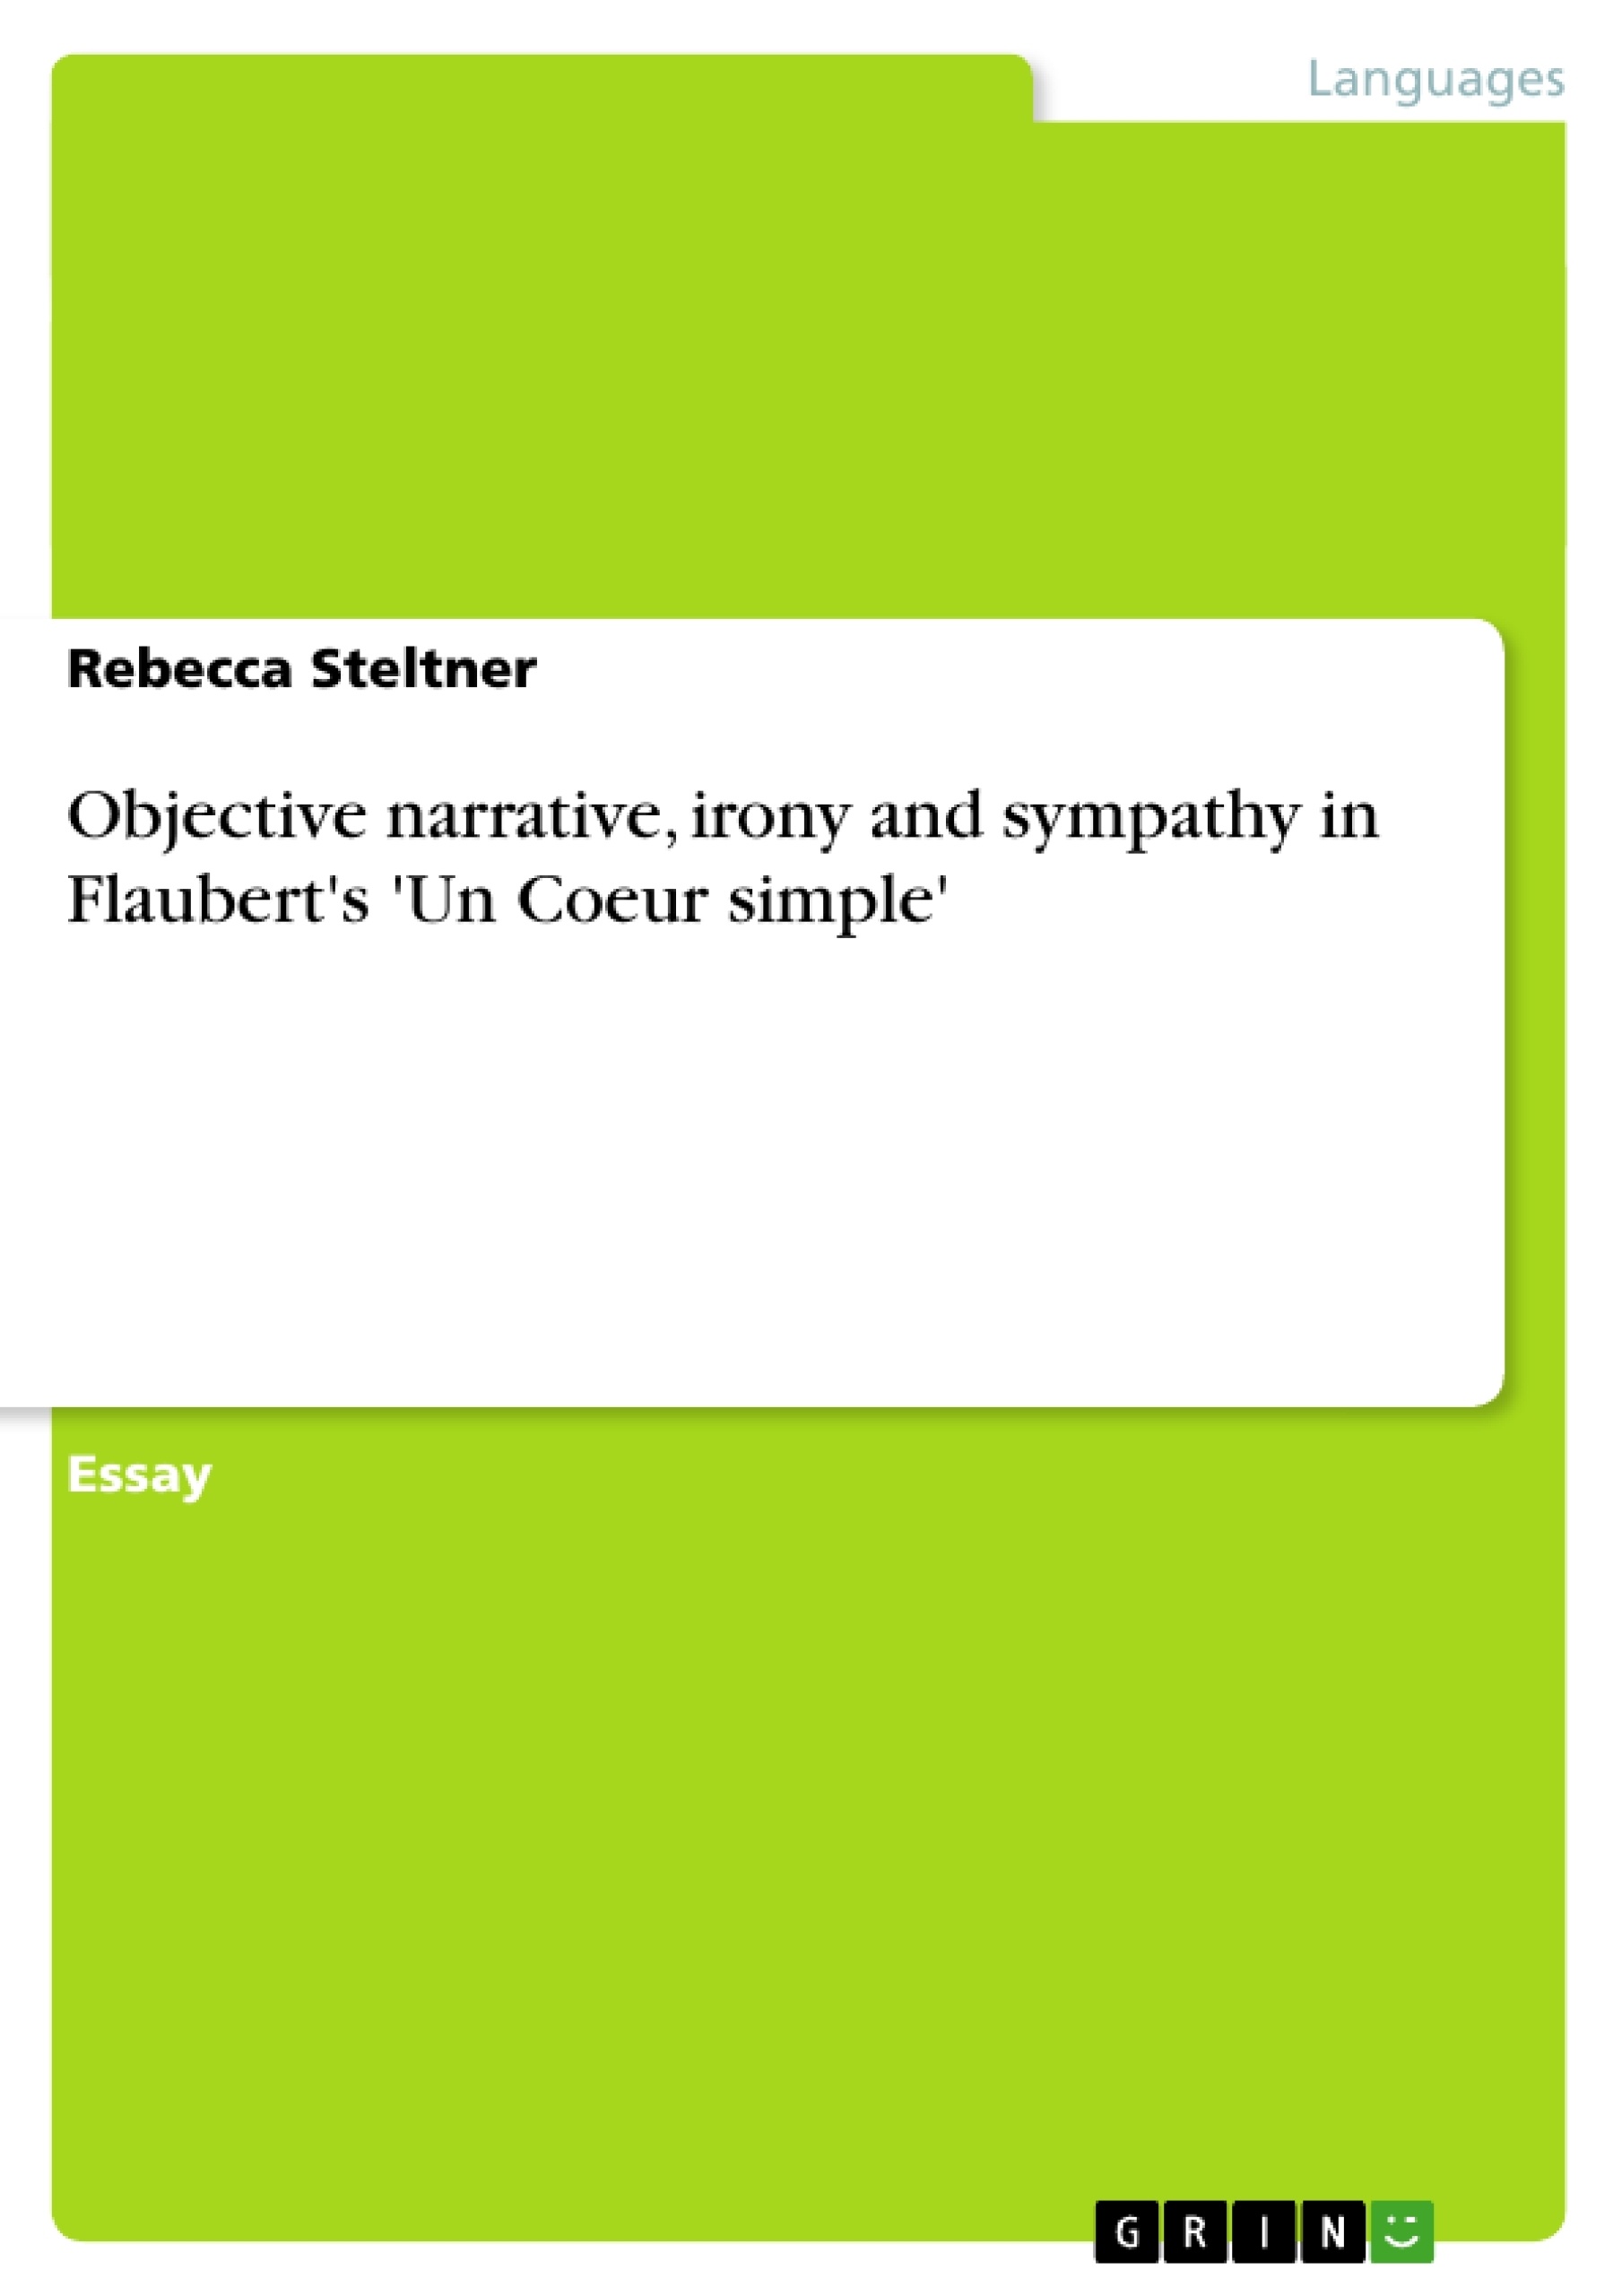 Titre: Objective narrative, irony and sympathy in Flaubert's 'Un Coeur simple'